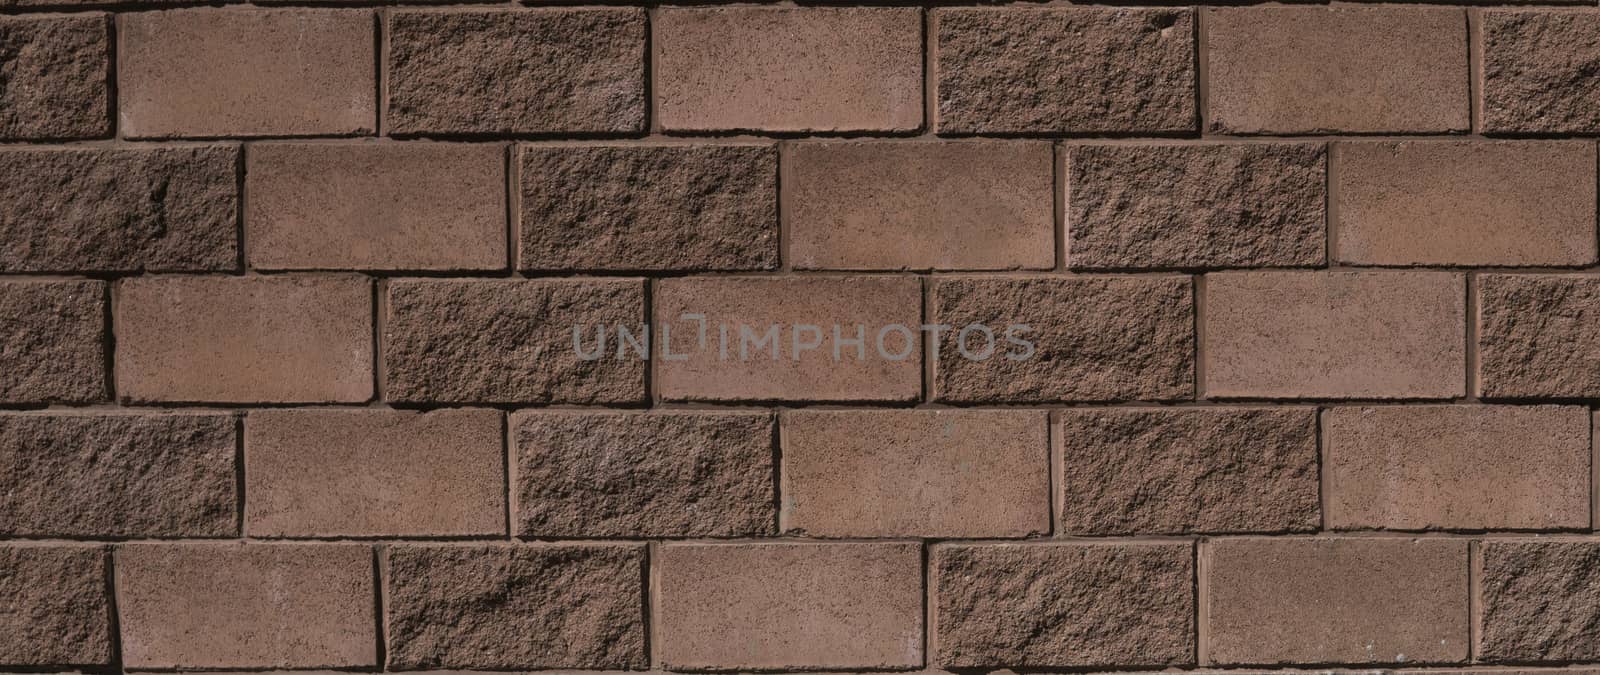 Brown-red walls stone texture lit by bright sunlight. by vovsht